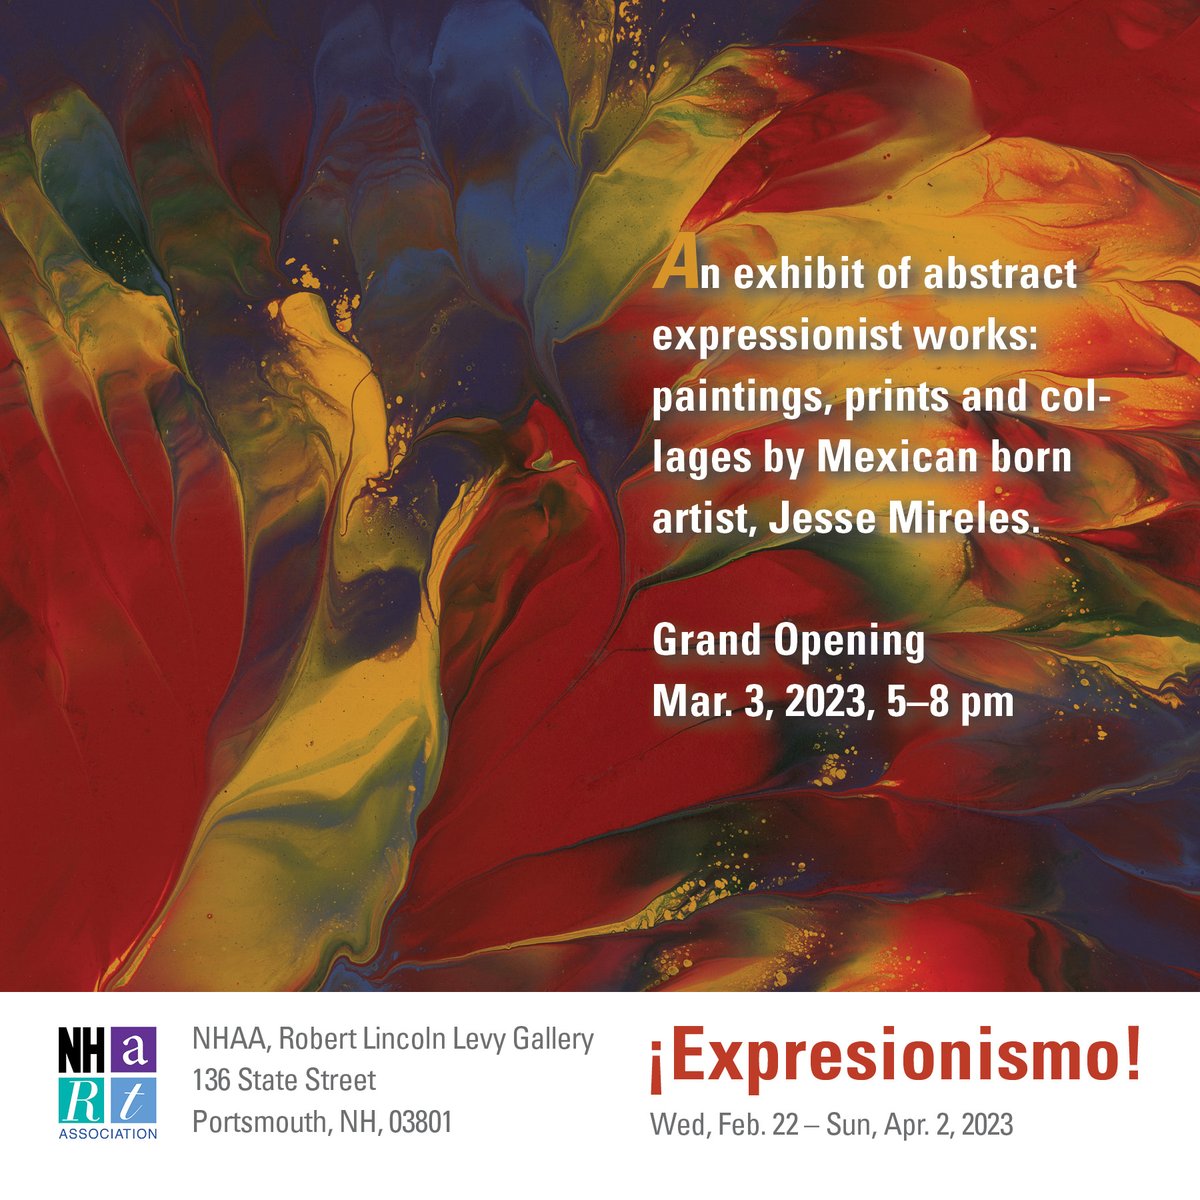 Putting together last minute details for my newest exhibit, ¡Expresionismo! in NHAA's Levy Gallery in Portsmouth NH. #abstractart #galleryopening #portsmouthnh #NHAA